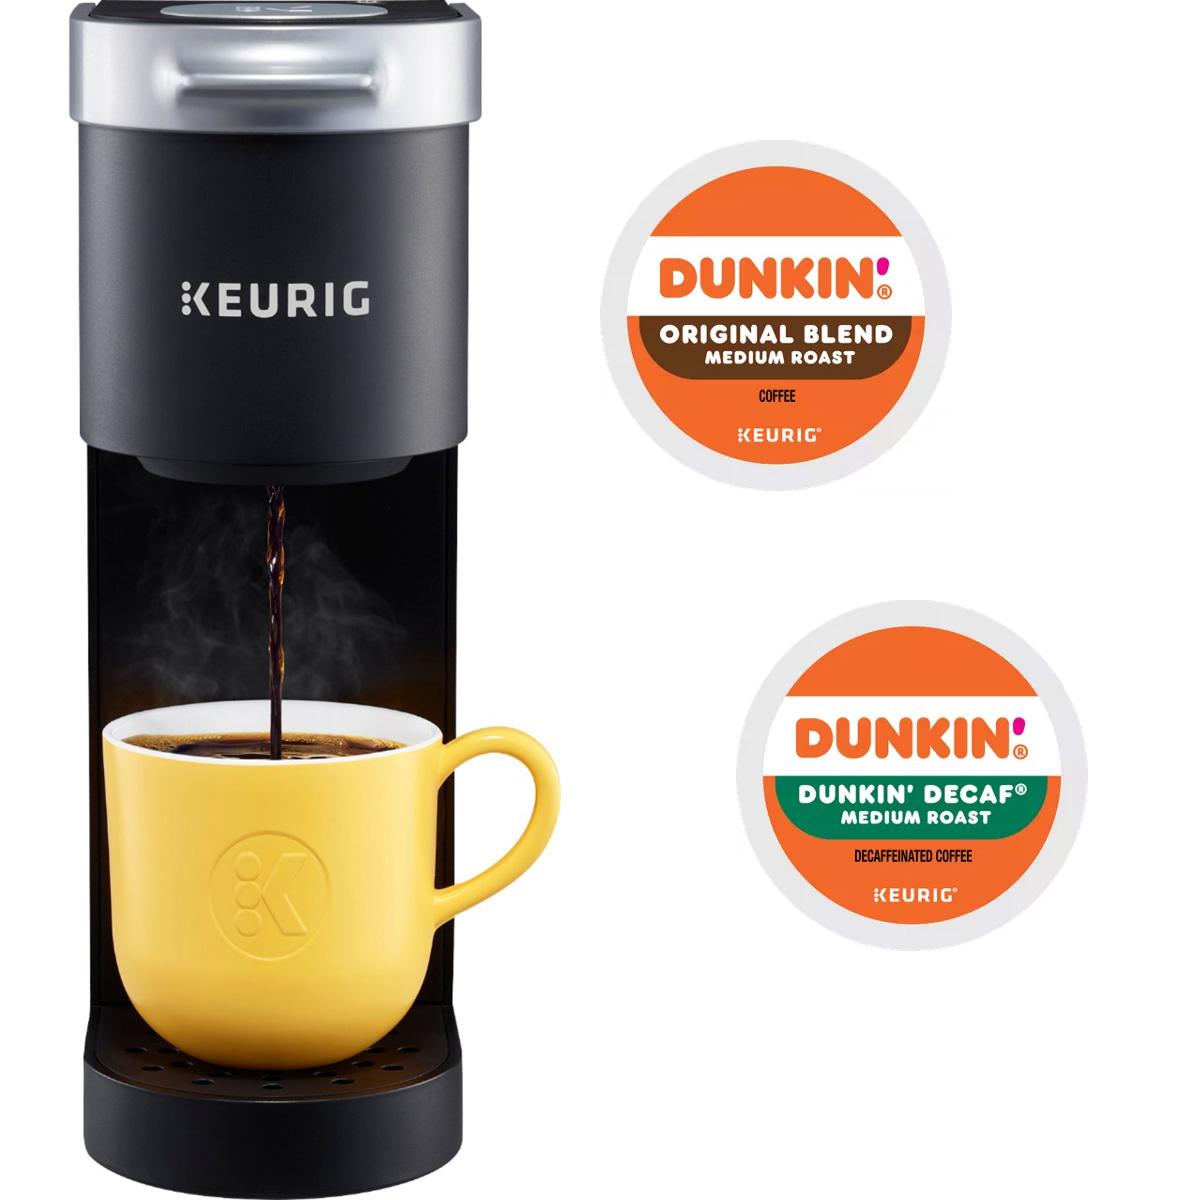 Keurig K-Mini Single Serve Coffee Maker with 44 Dunkin K-Cups for $37.49 Shipped